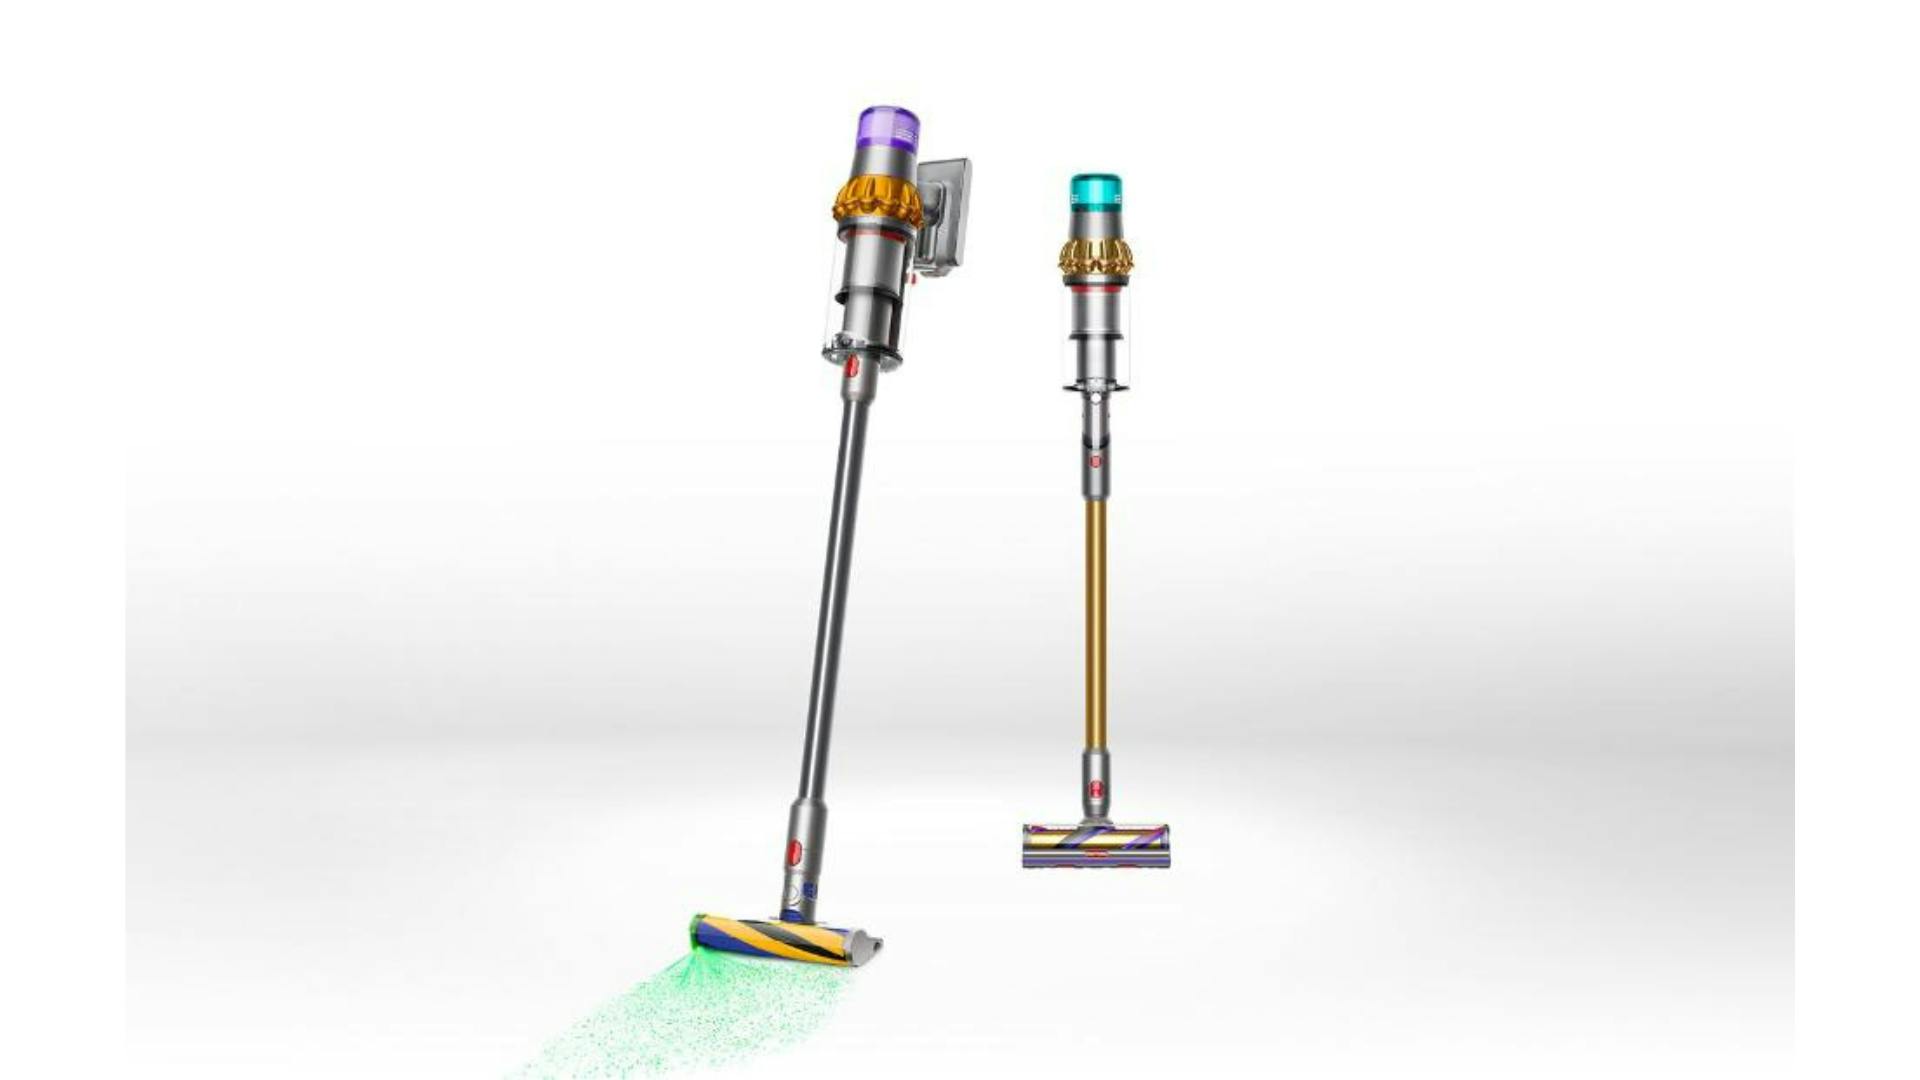 A Dyson Vacuum model has been shown. 